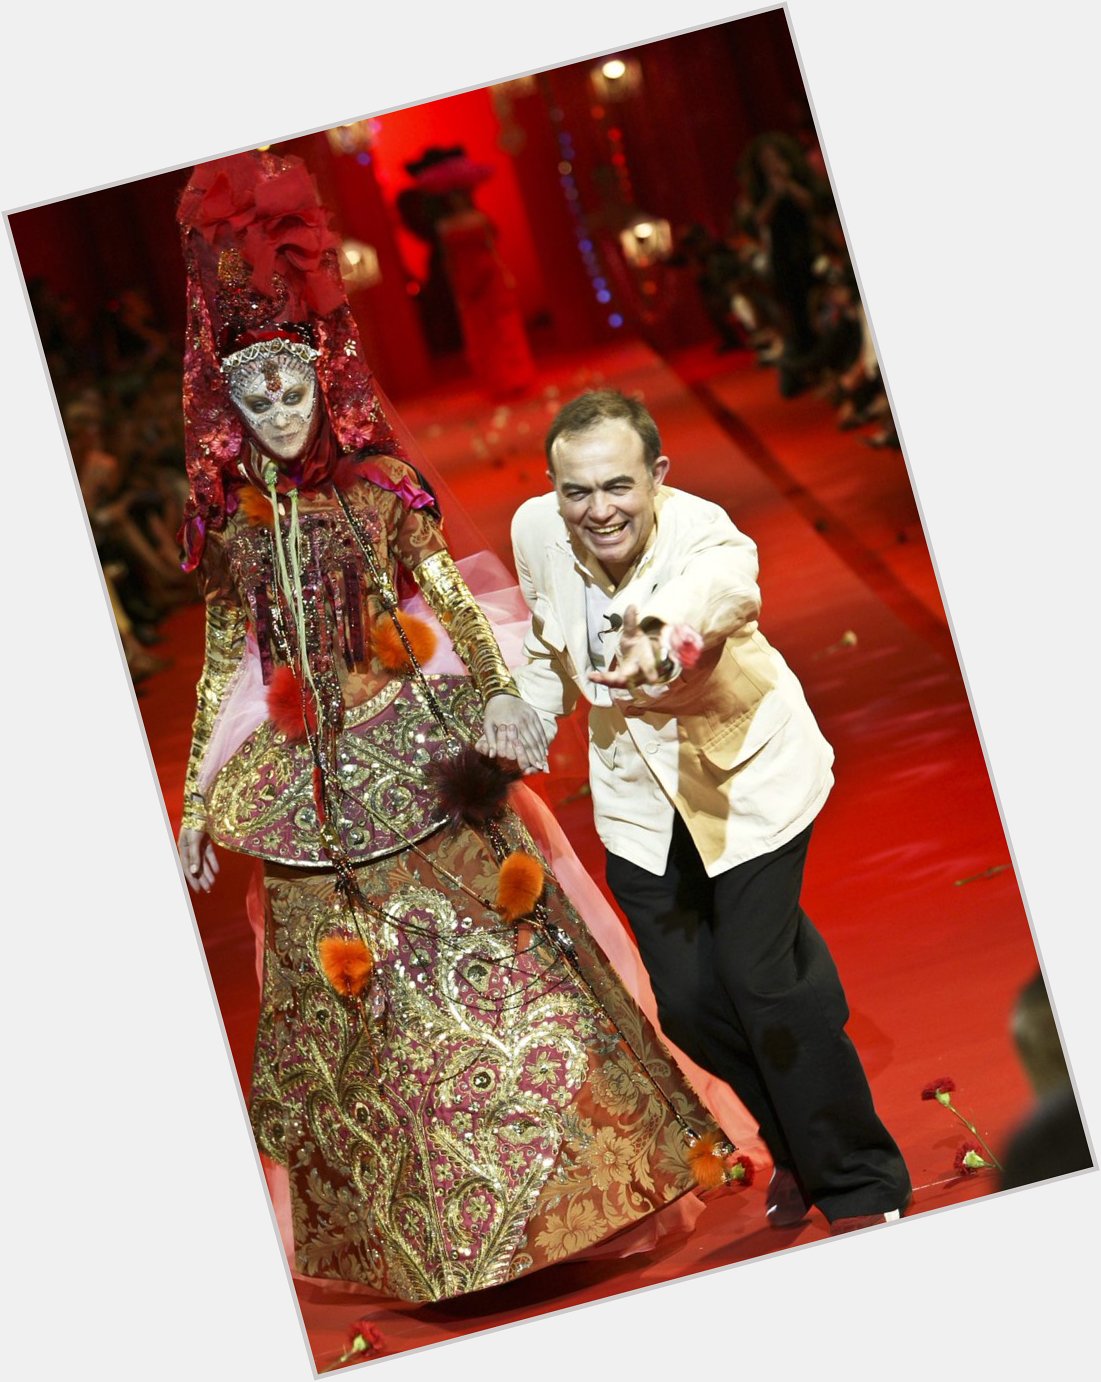 Happy birthday to the iconic couturier Christian Lacroix 